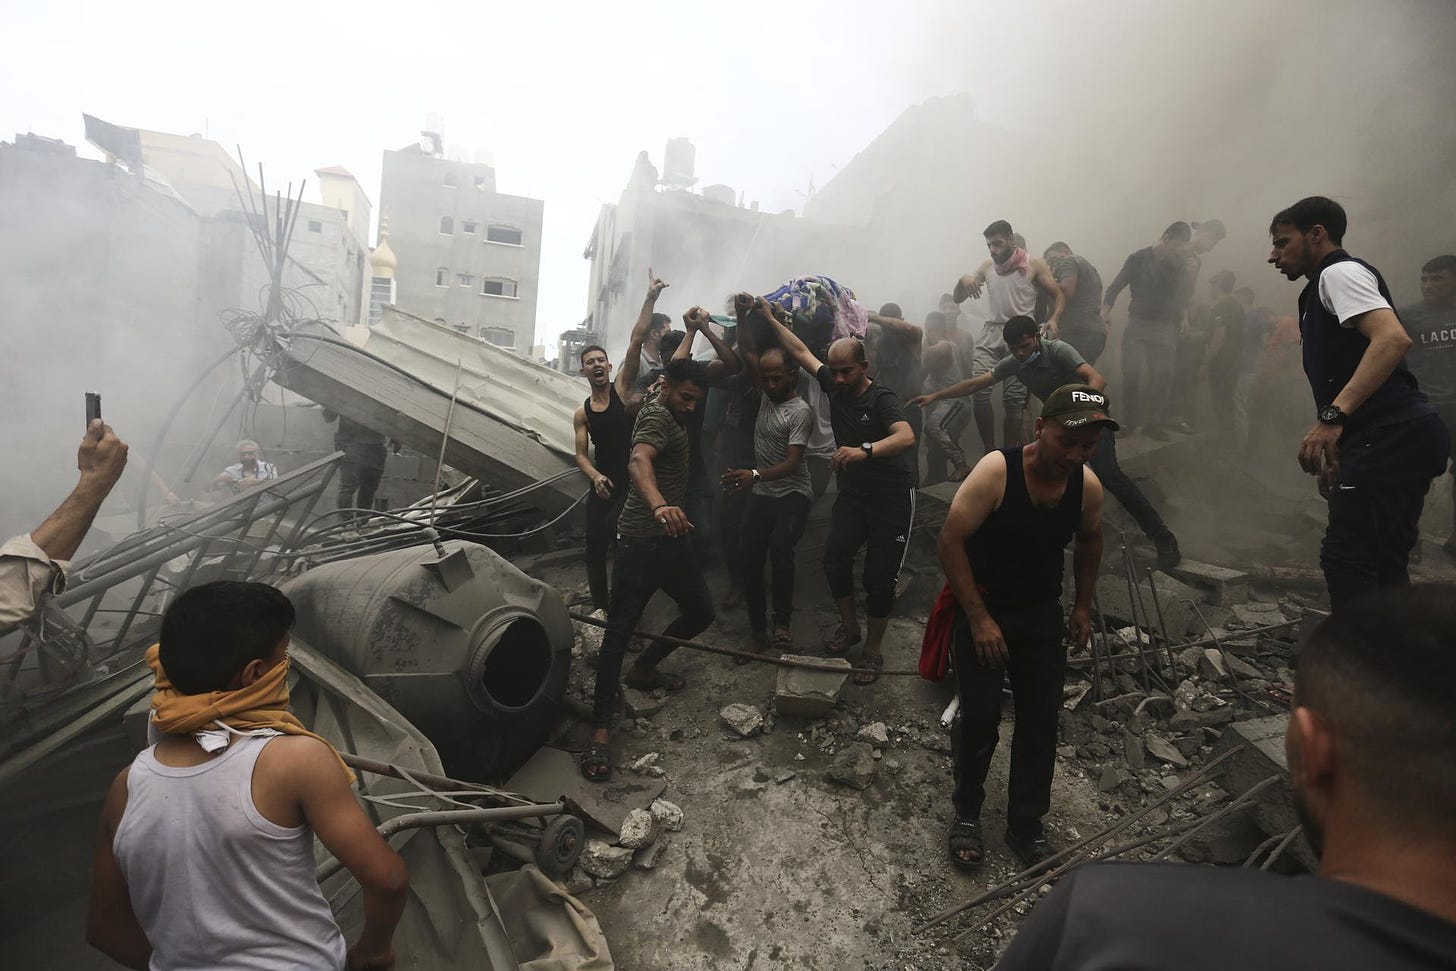 Palestinians remove a body from the rubble after an Israeli airstrike on Gaza’s Jebaliya refugee camp on Monday.